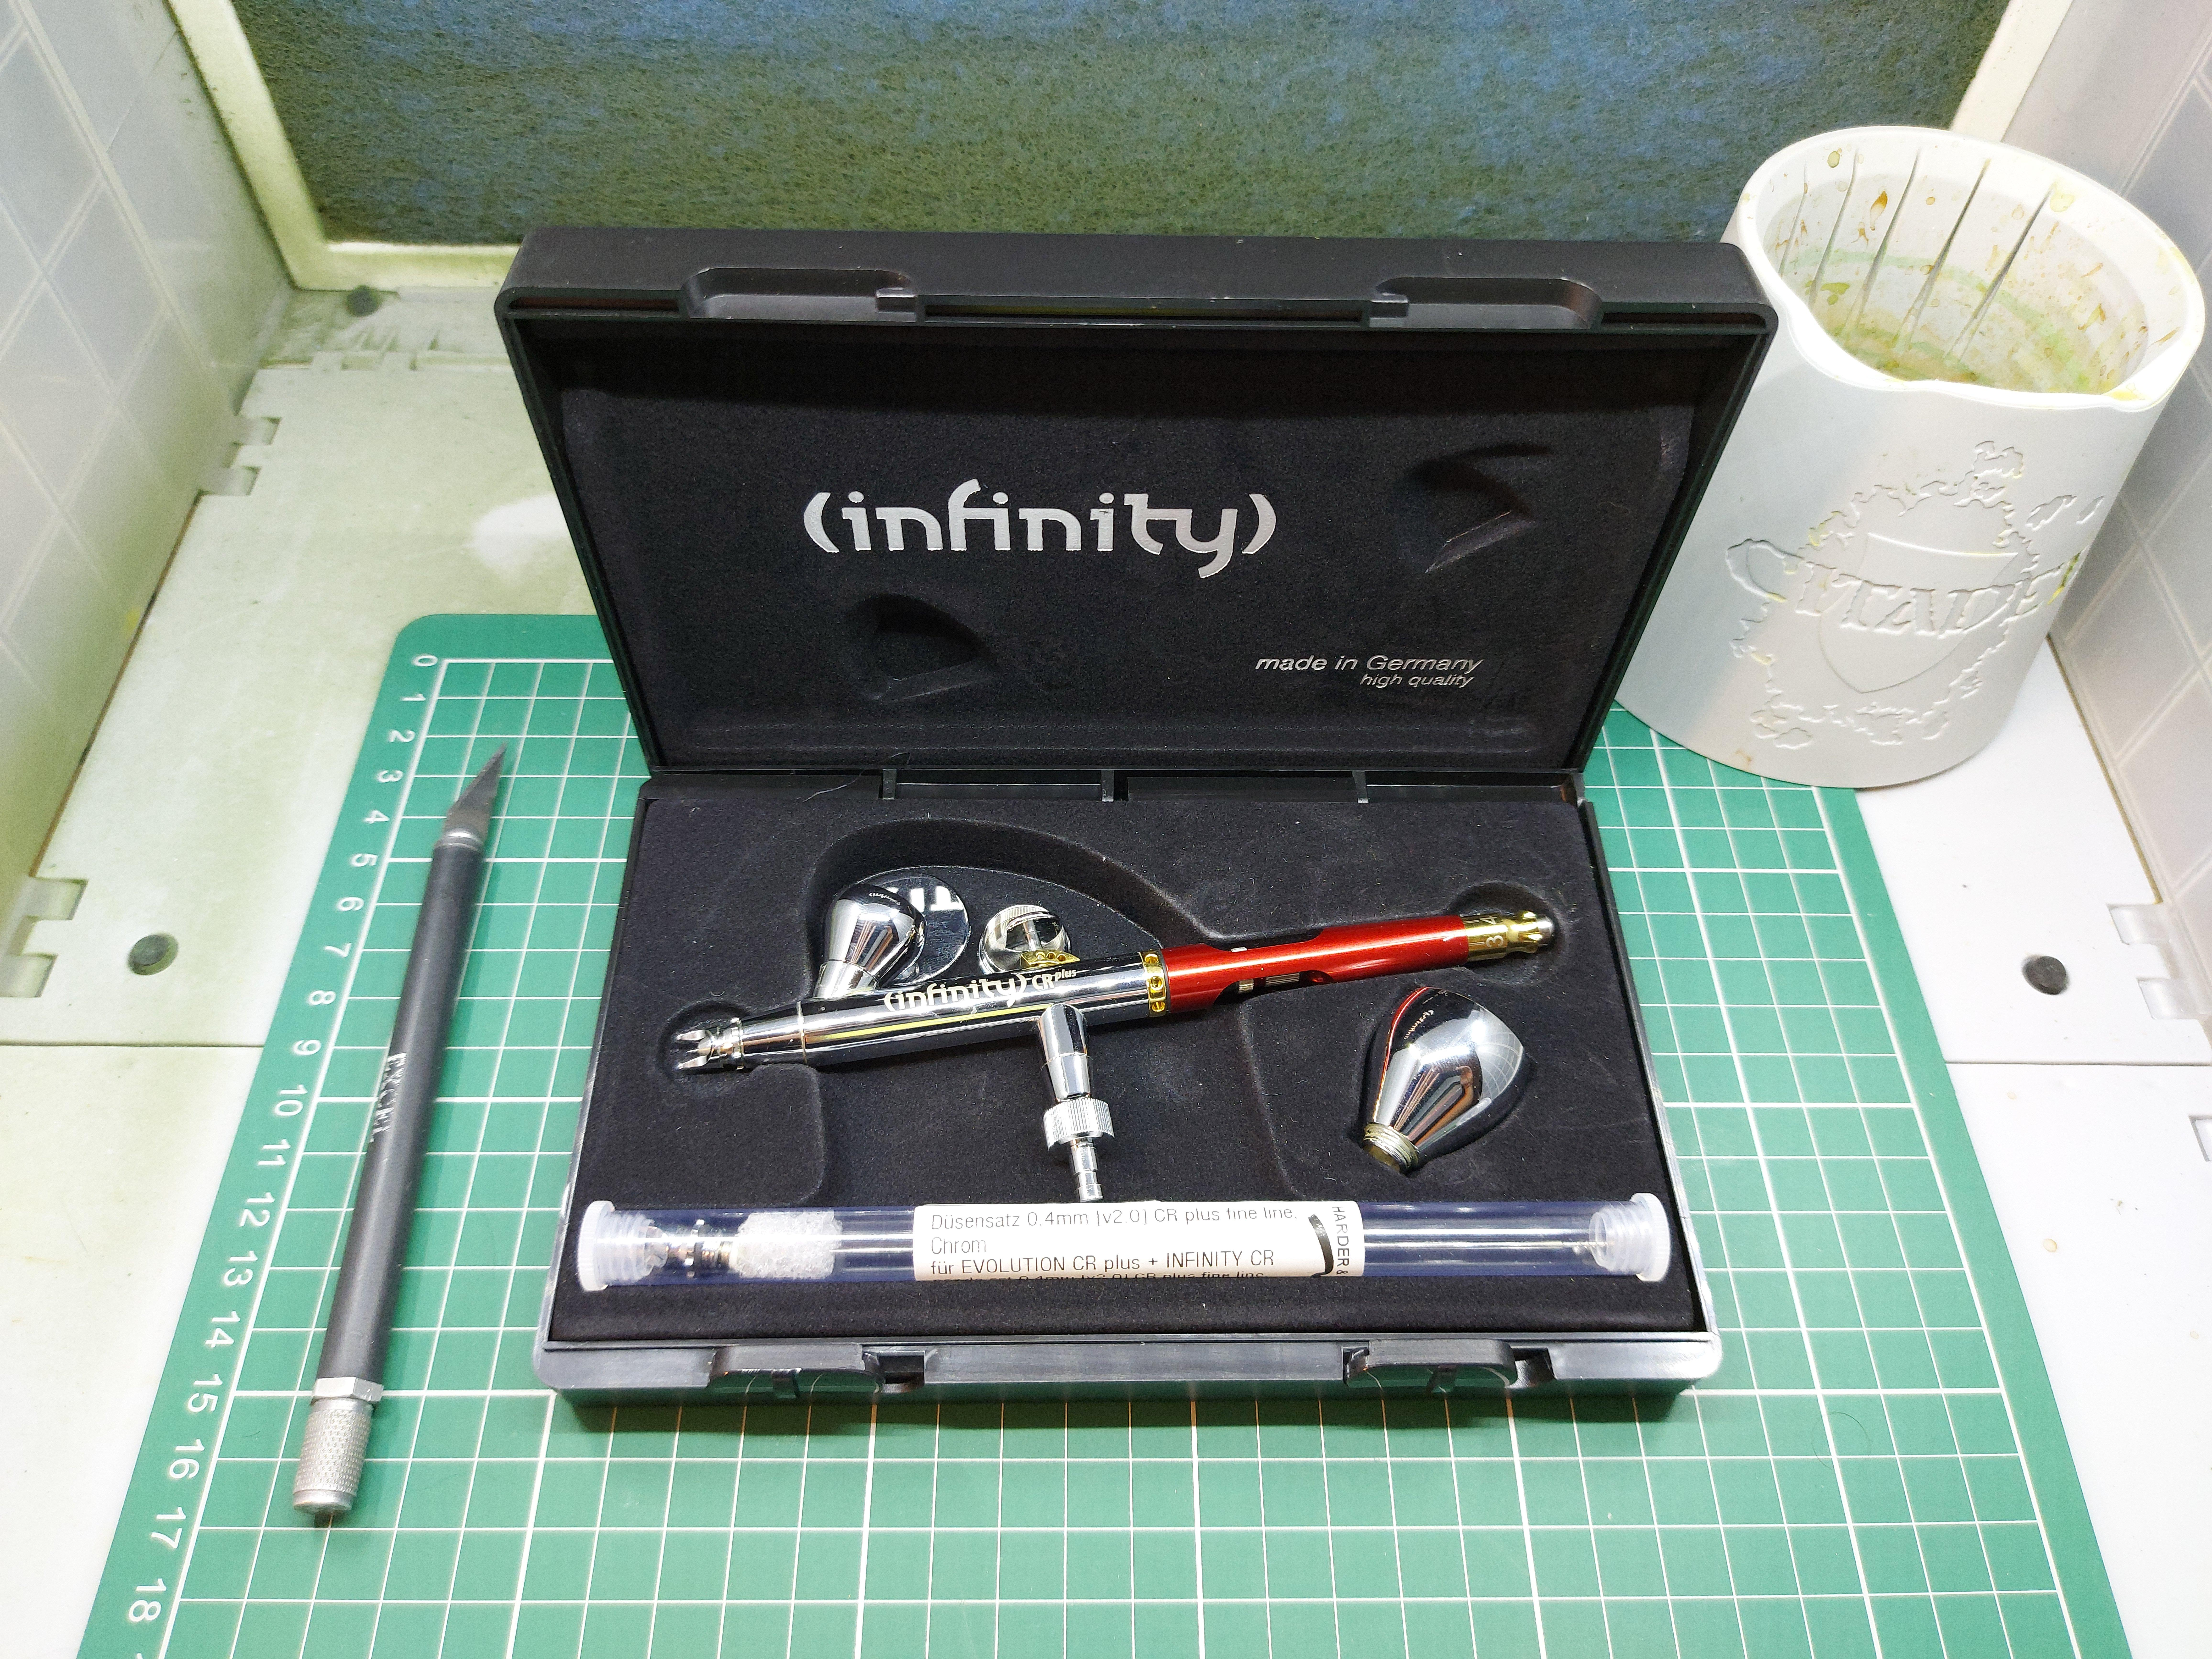 Airbrush, Compressor, Harder &amp; Steenbeck, Infinity, Sparmax